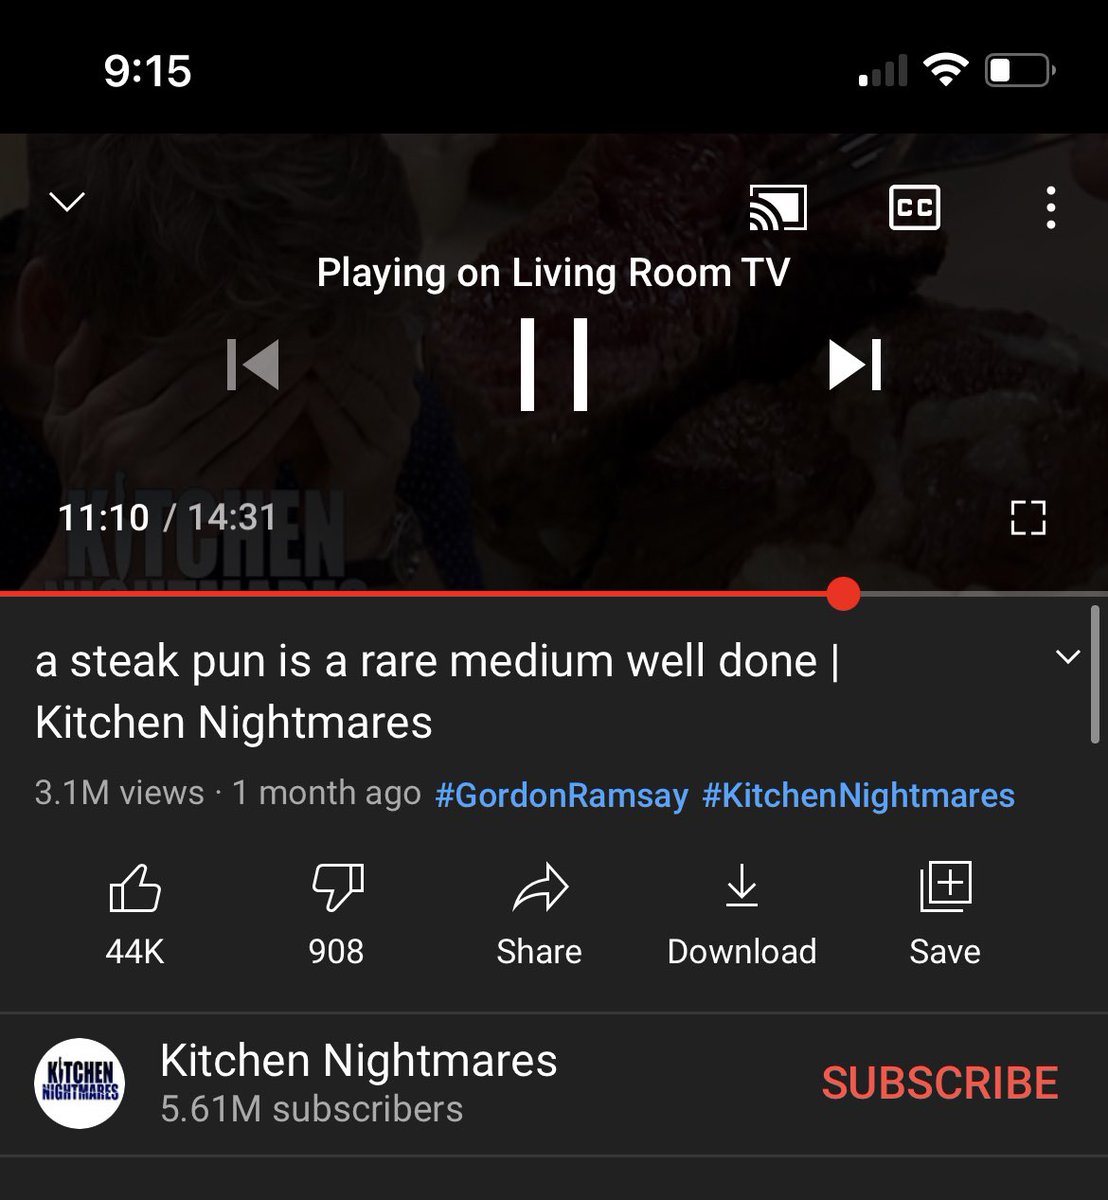 whoever’s naming these videos for the kitchen nightmares/Gordon Ramsay social media is doing fantastic. Superb. 10/10 https://t.co/f3jVkYO2OU